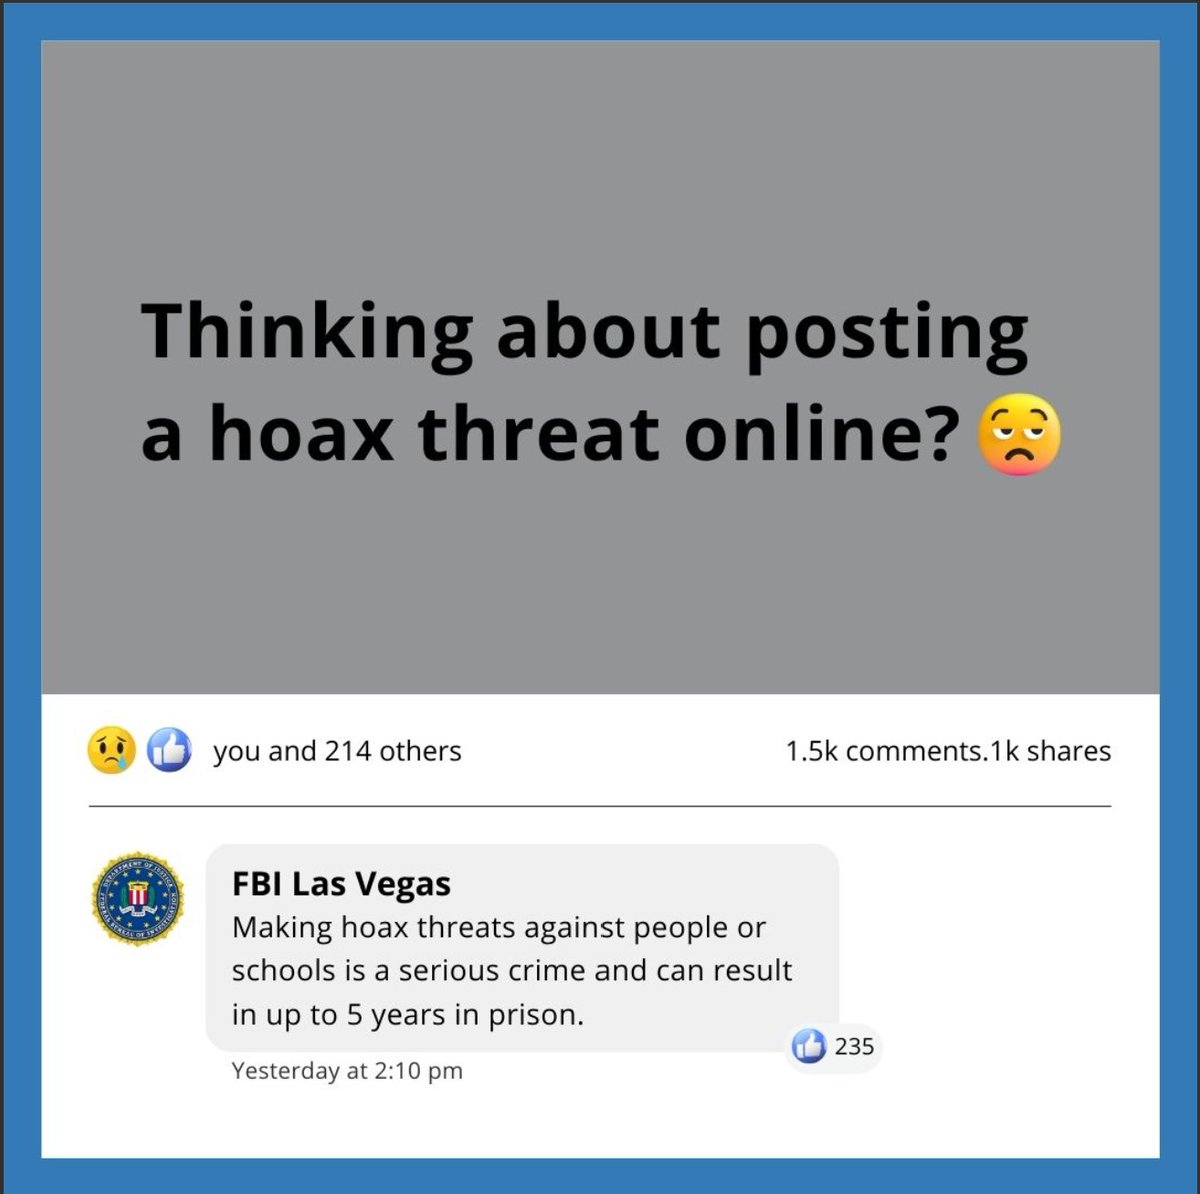 Posting a hoax threat is no joke! A poor decision today may have severe consequences for your future. #ThinkBeforeYouPost ➡️ow.ly/qGSb50Iyfx0